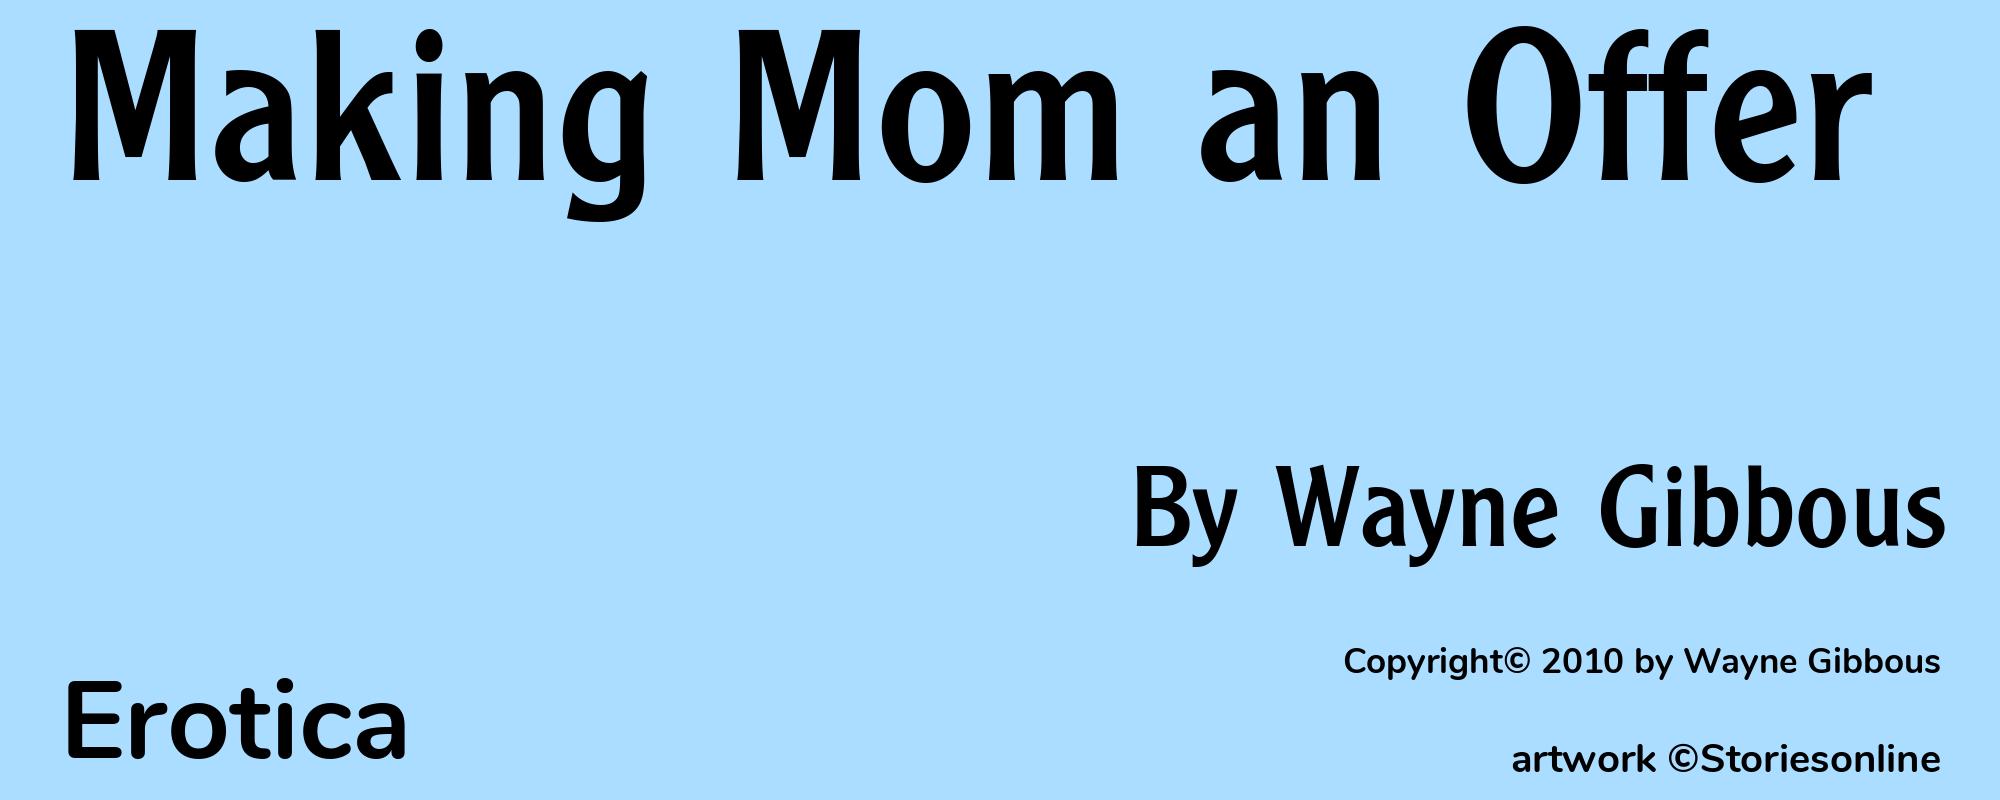 Making Mom an Offer - Cover